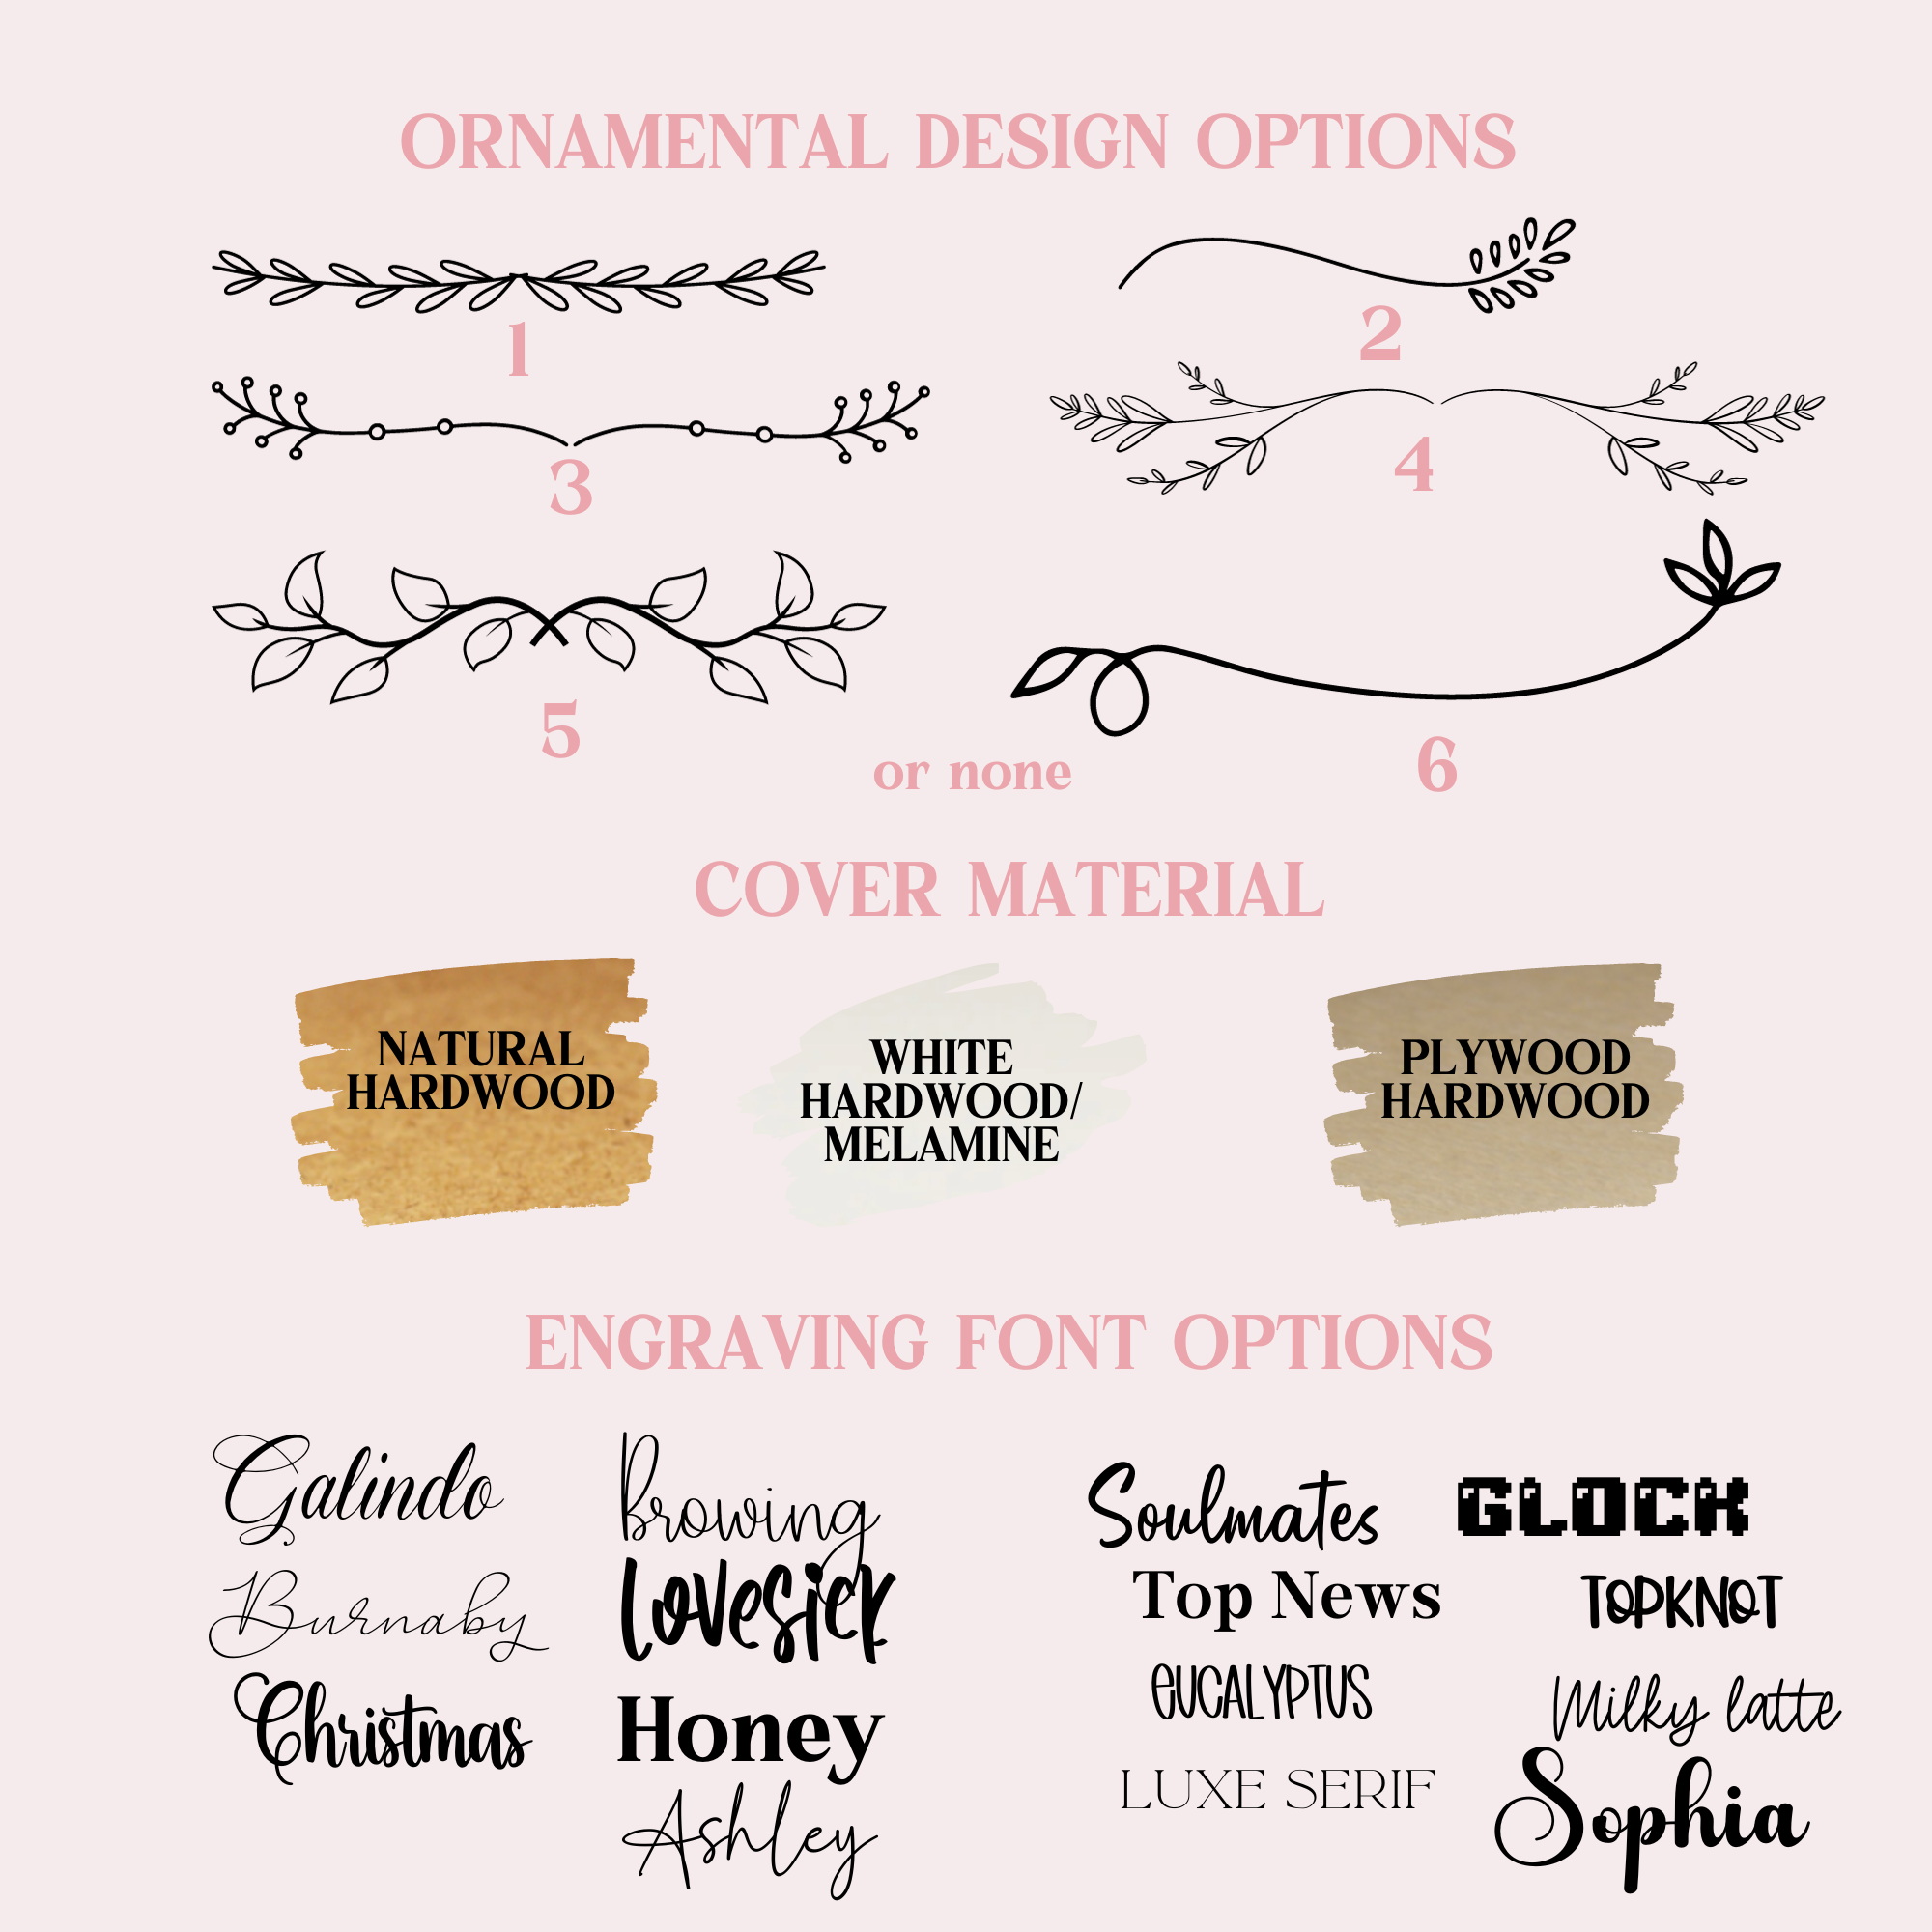 Ornamental design, cover material and font options